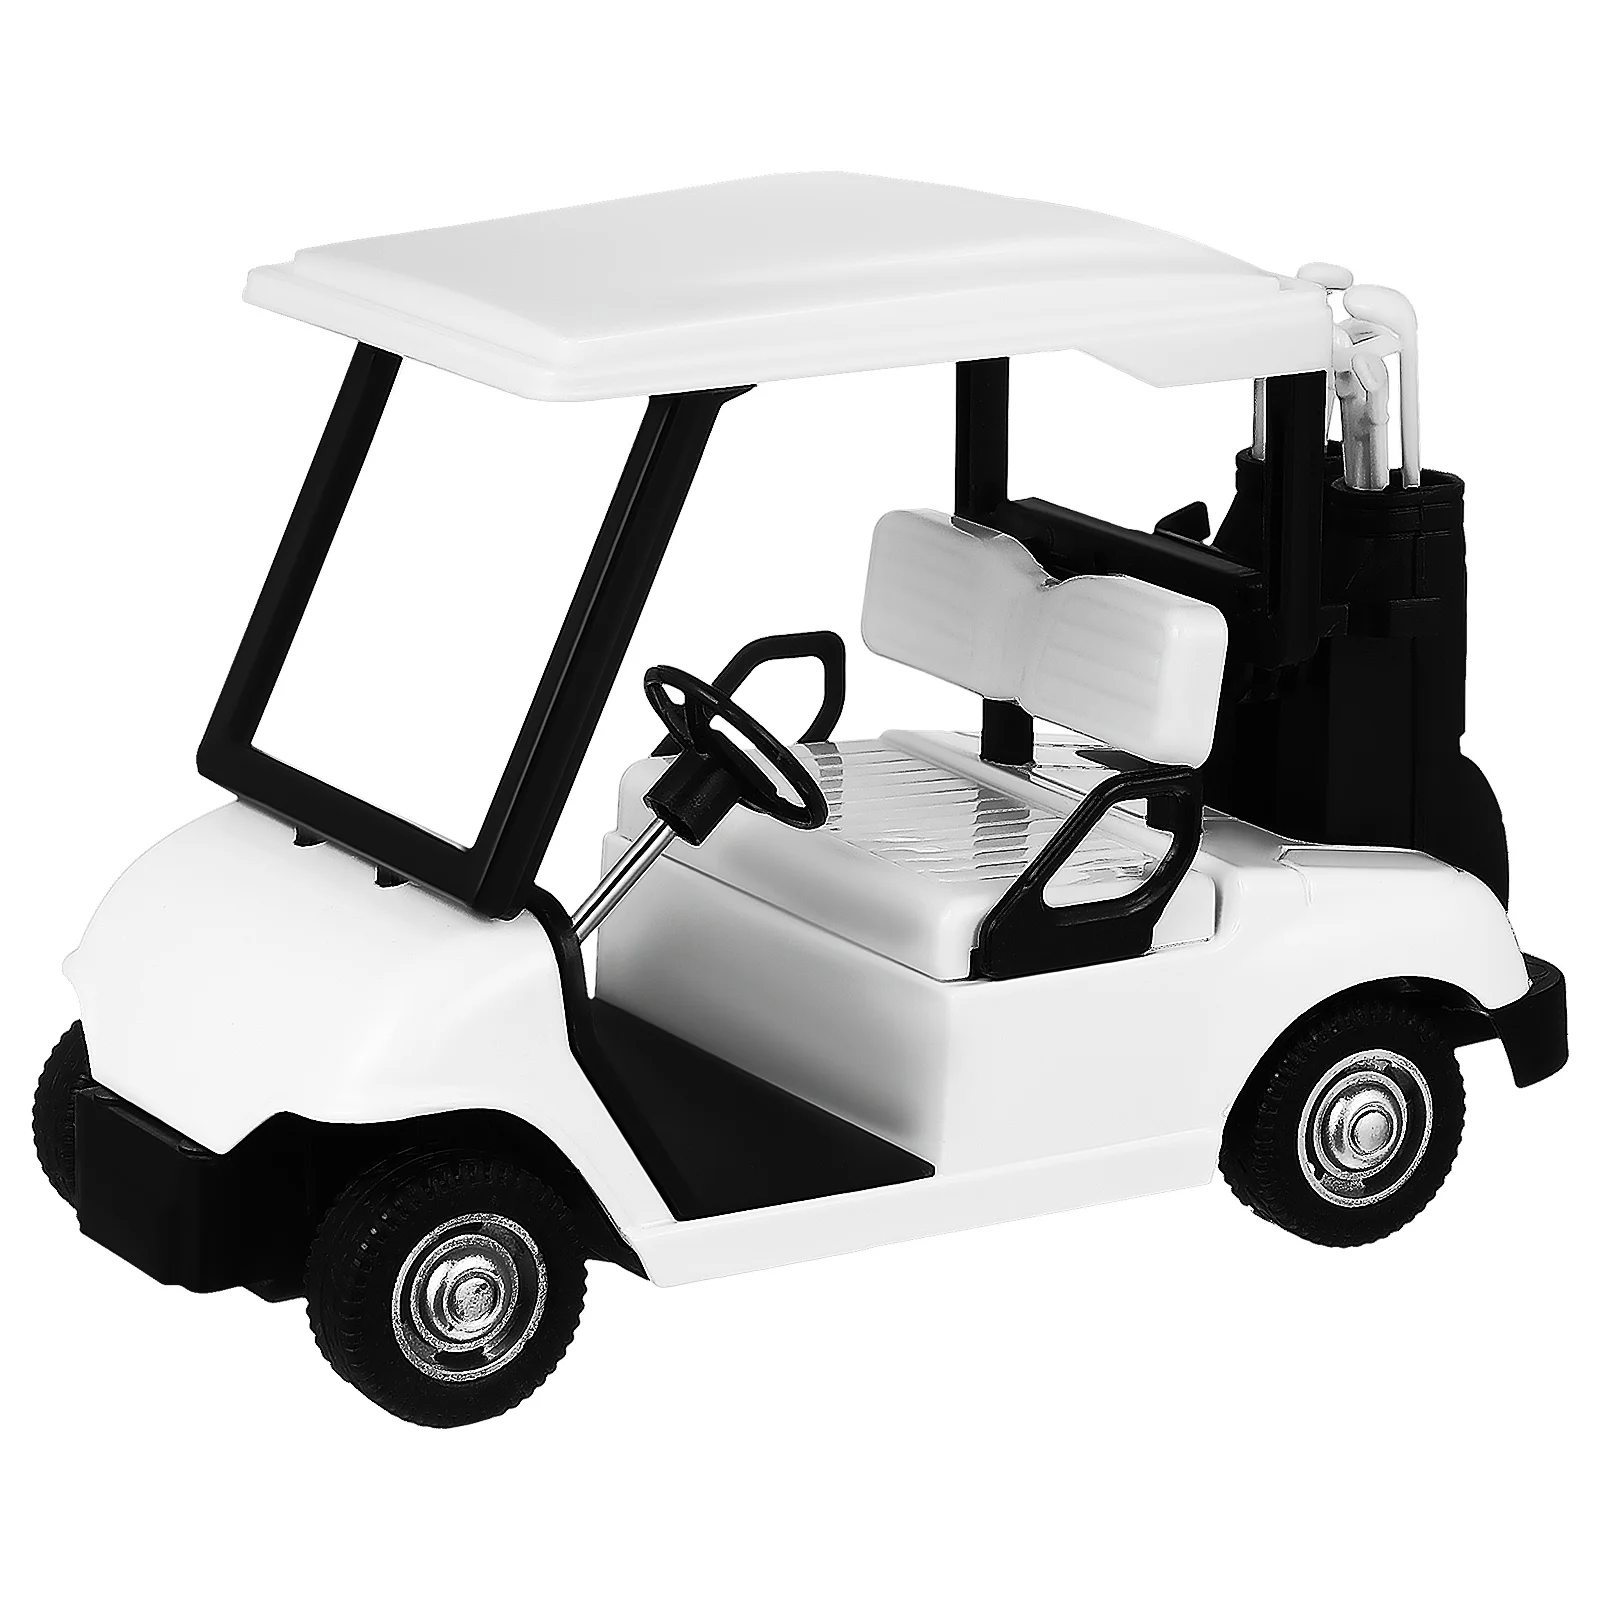 Alloy Metal Golf Cart Model Golf Cart Plaything Cart Metal Model Golf Cart Toy Golfing Themed Desk Decor Golf Party Supply 10 themed silicone bracelets note bracelets dance challenge party wristbands for boys party supplies white